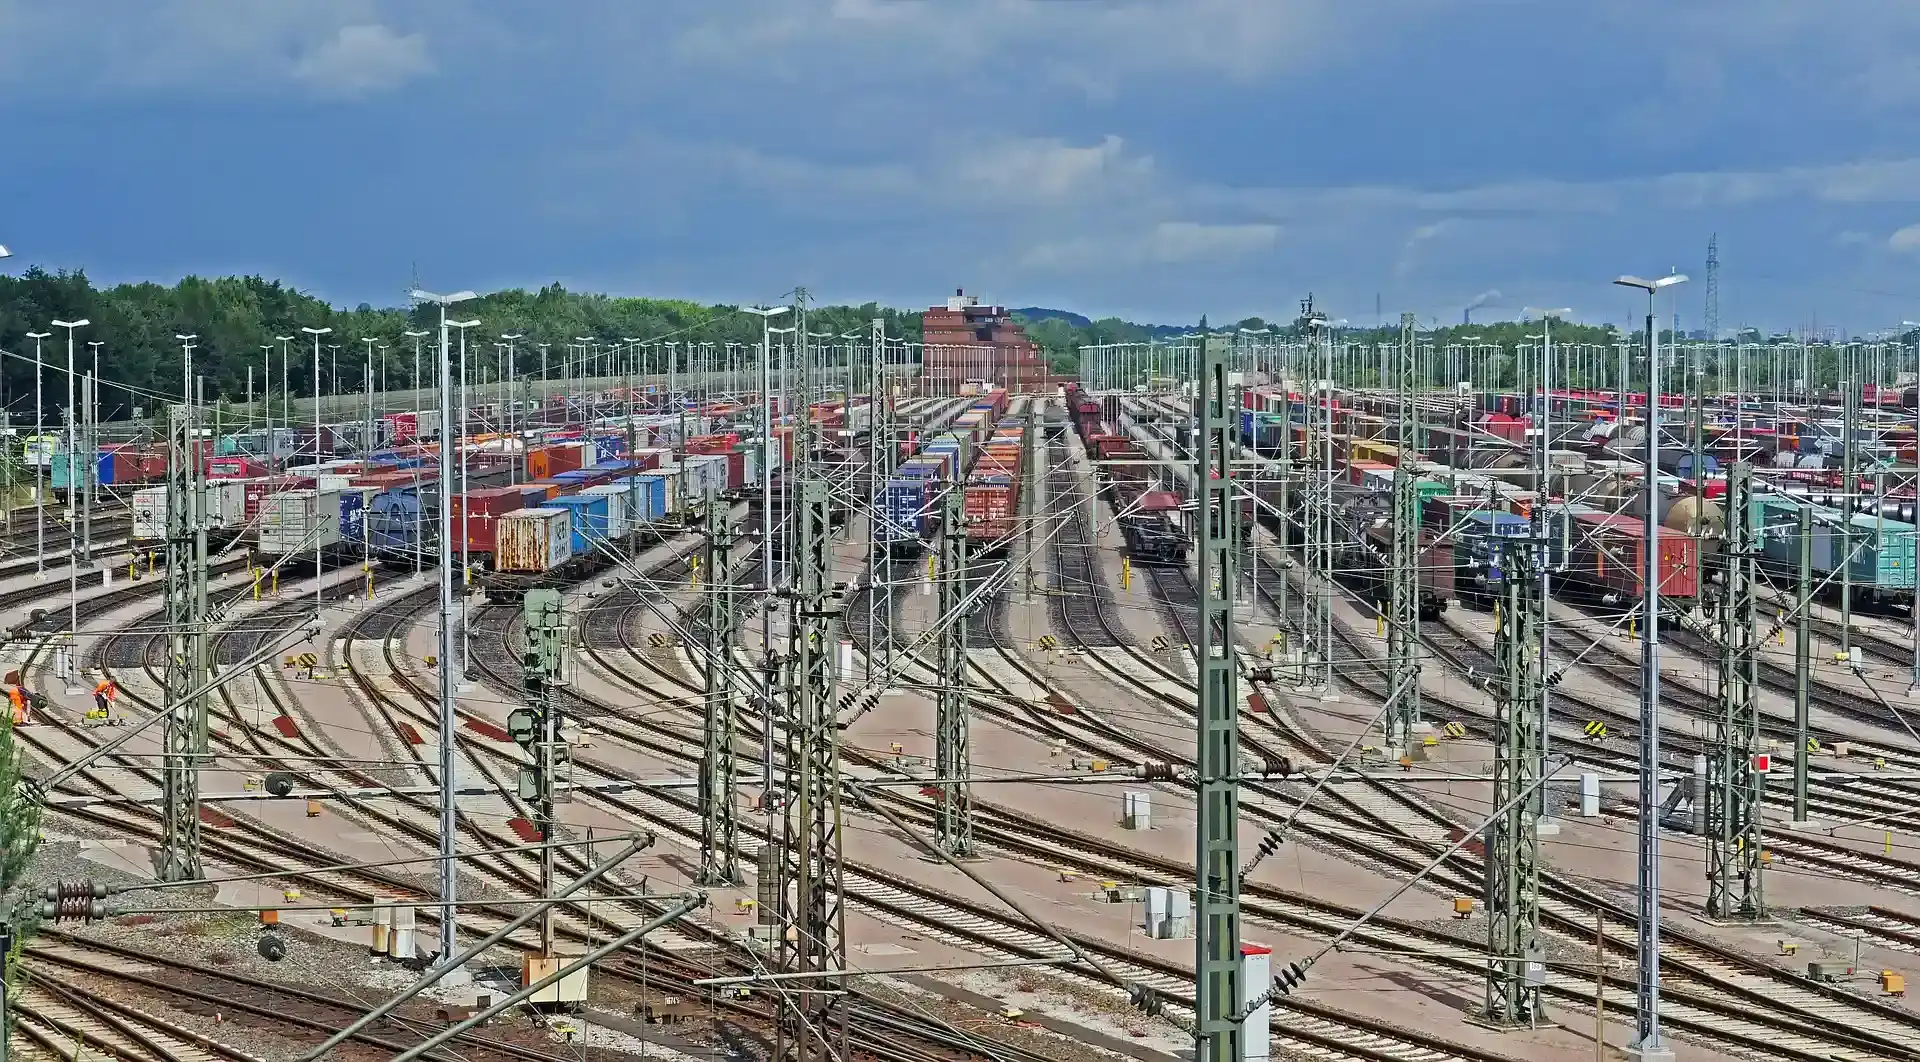 Multiple train tracks with freight wagons